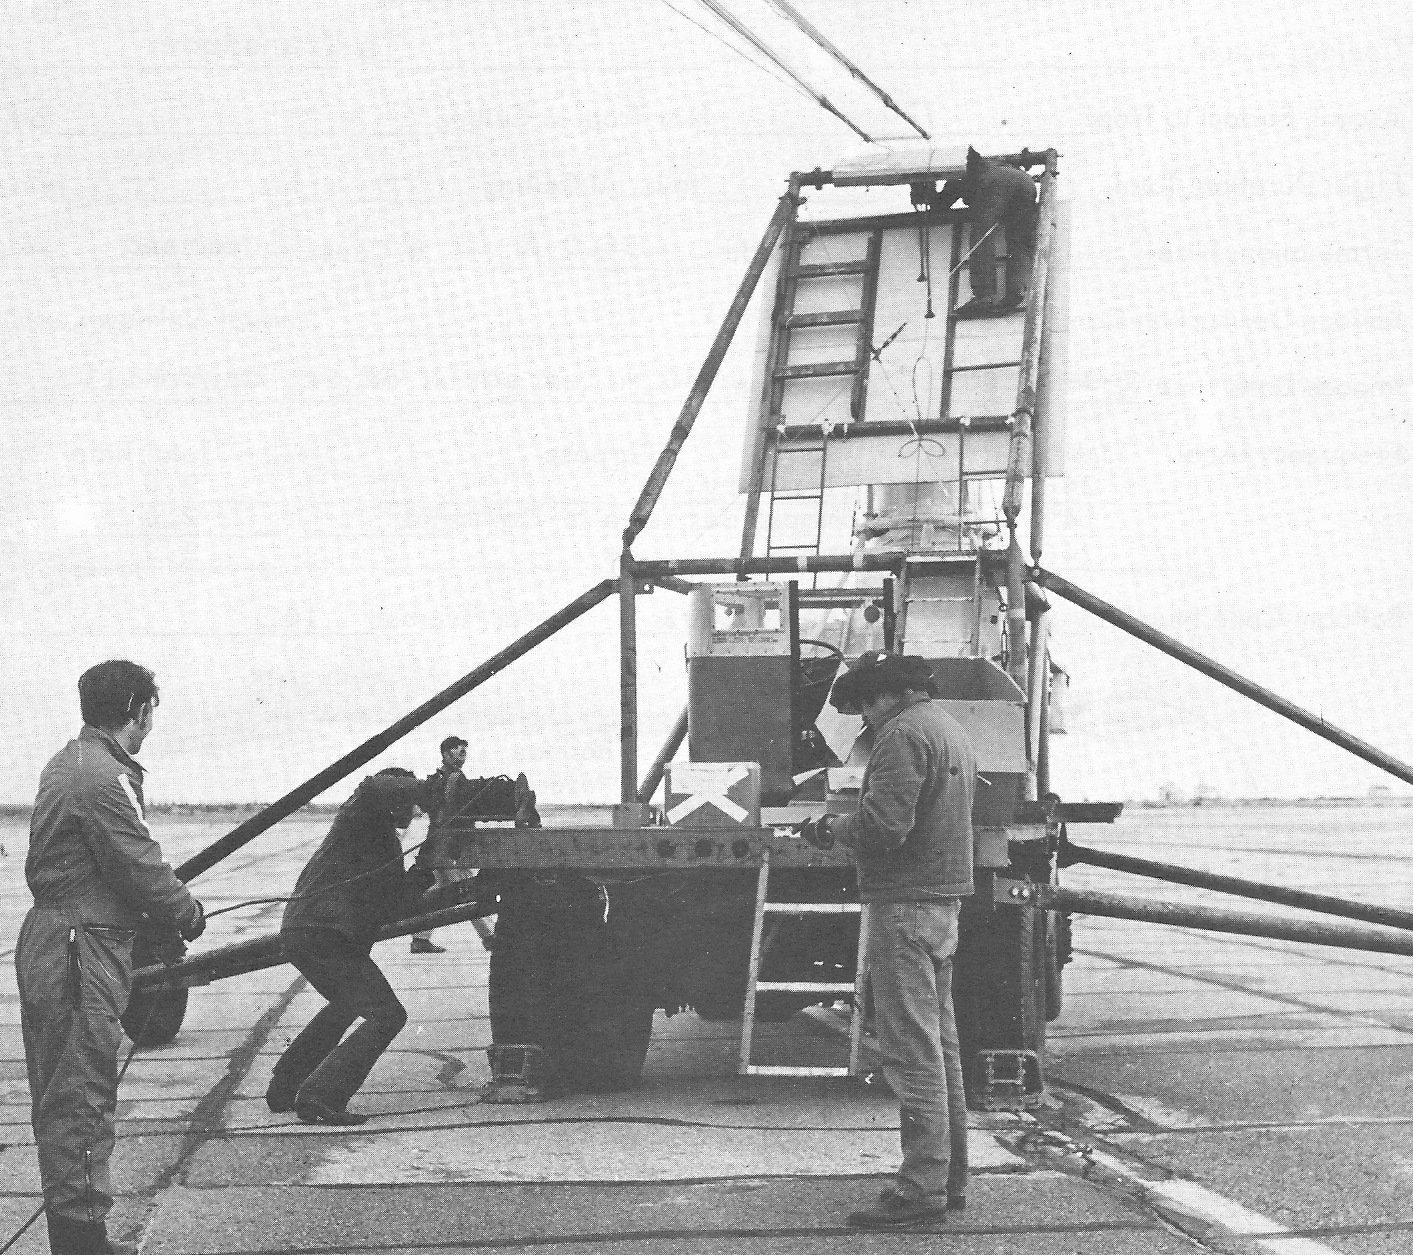 Rigging the launch truck for launch (Image: Raven Industries inc.)